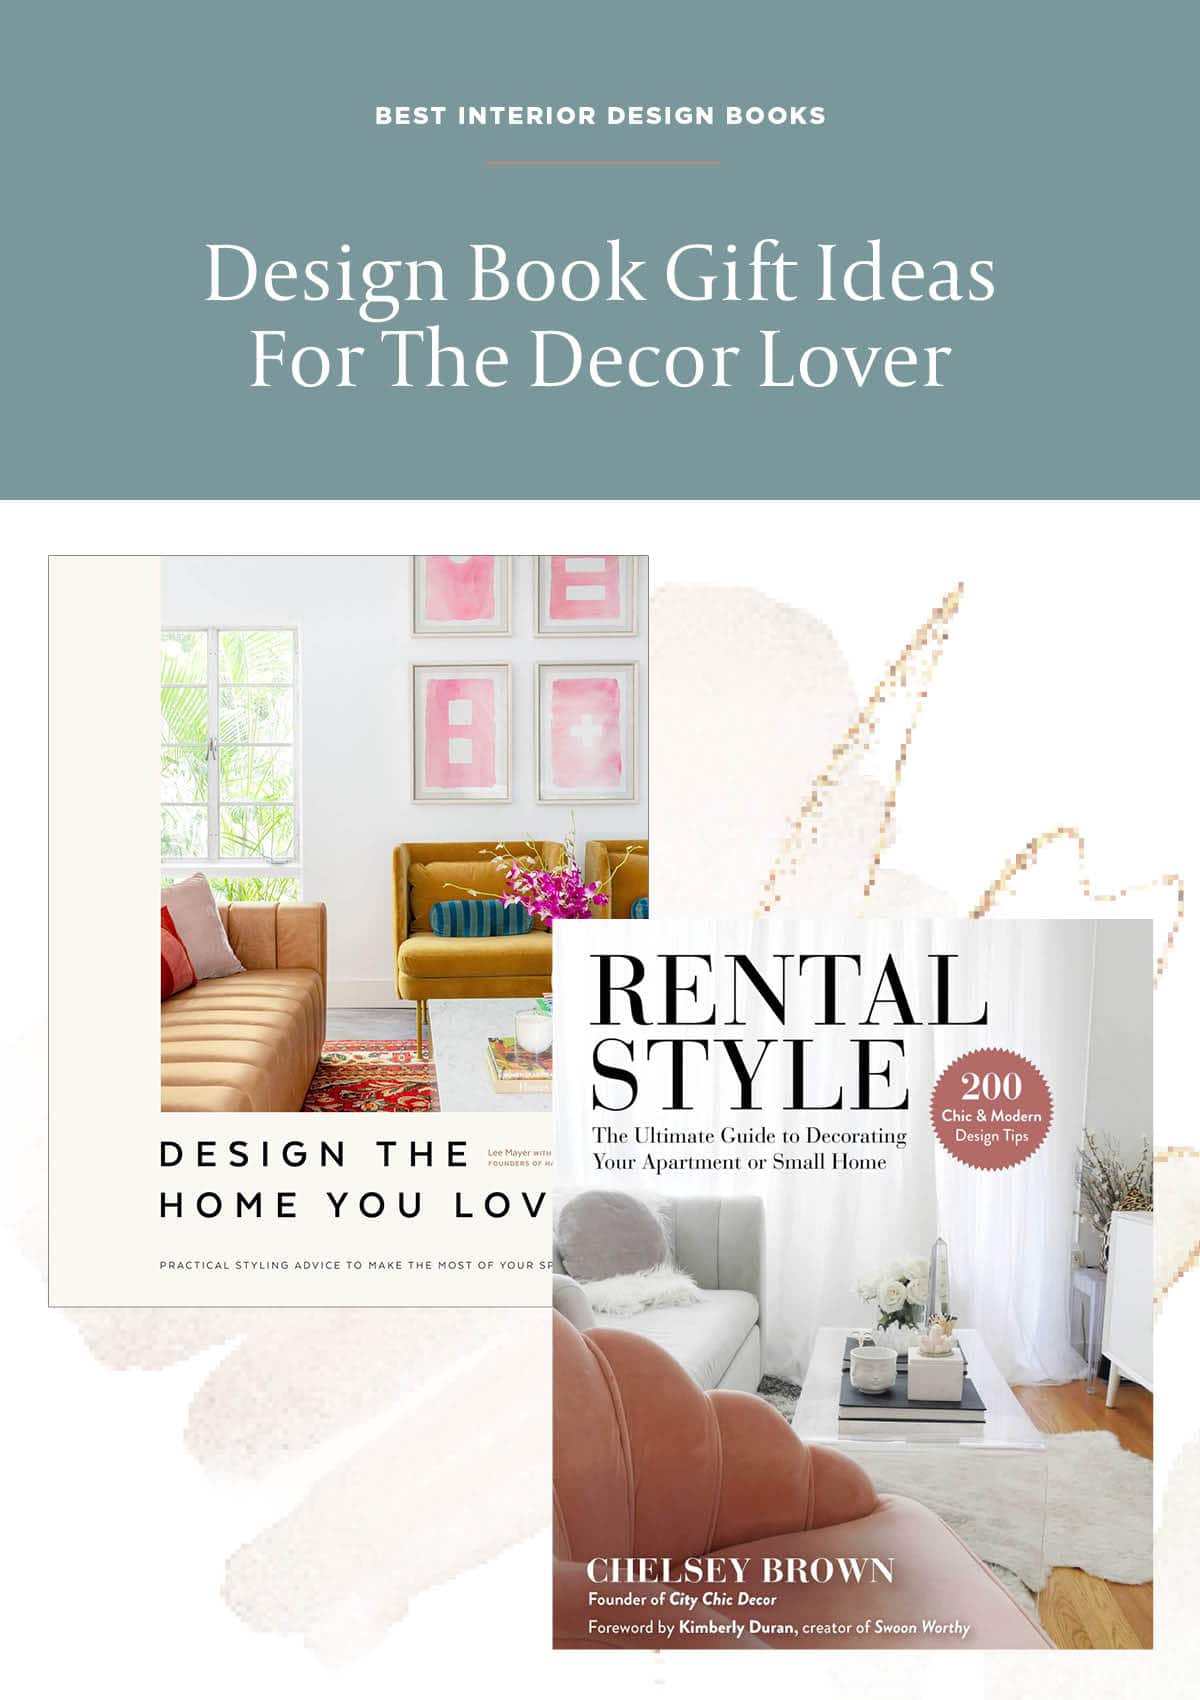 The Best New Home Decor Books To Inspire Your Next Refresh - Brit + Co